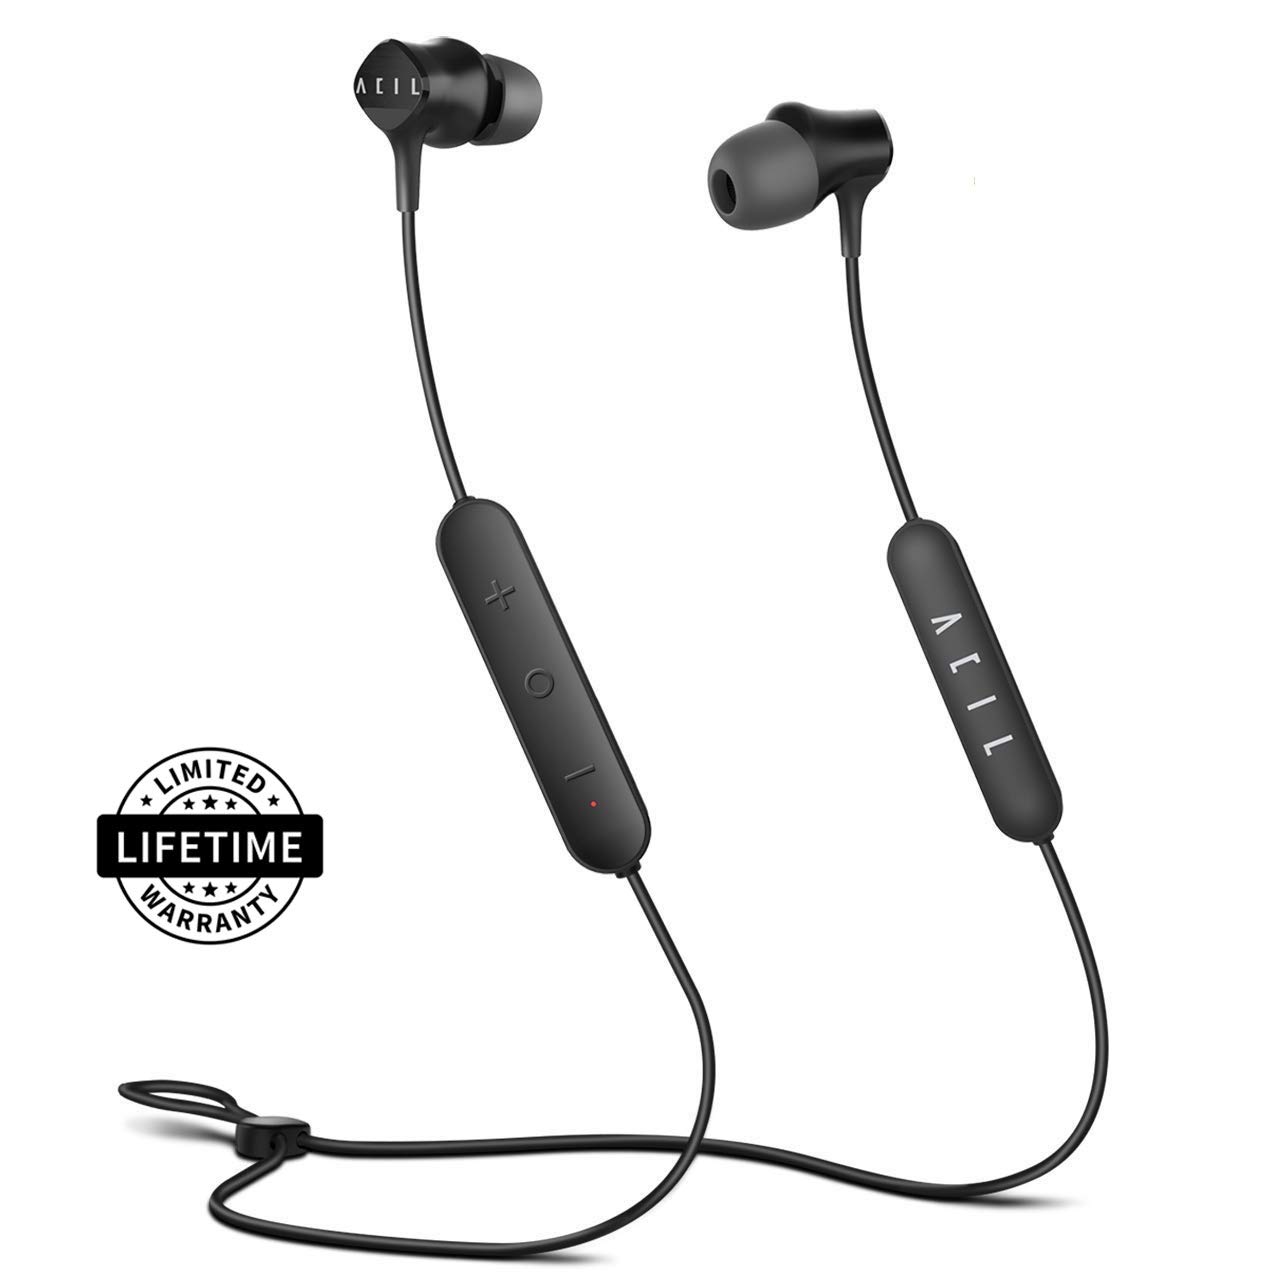 Bluetooth Earbuds, ACIL Wireless Earbuds 12H Battery Sweatproof, Hybrid Dual Drivers Superb HiFi Stereo, Ultra Comfort Secure Fit, Noise Cancelling Bluetooth in-Ear Headphones w/Mic & Magnetic Feature